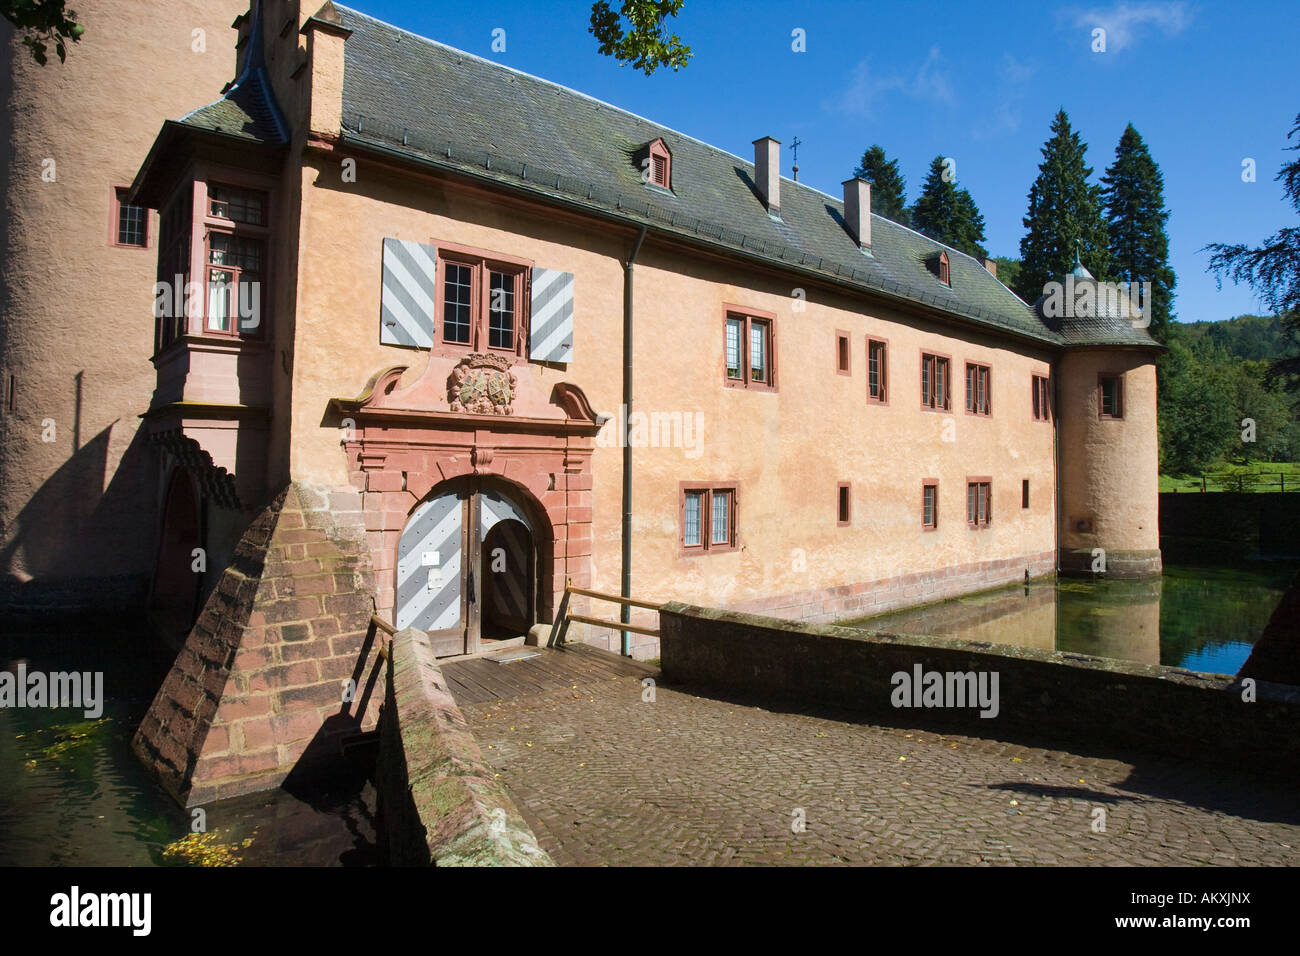 The moated castle Mespelbrunn is located in a remote side valley of the Elsava valley in Spessart, Bavaria, Germany. Stock Photo